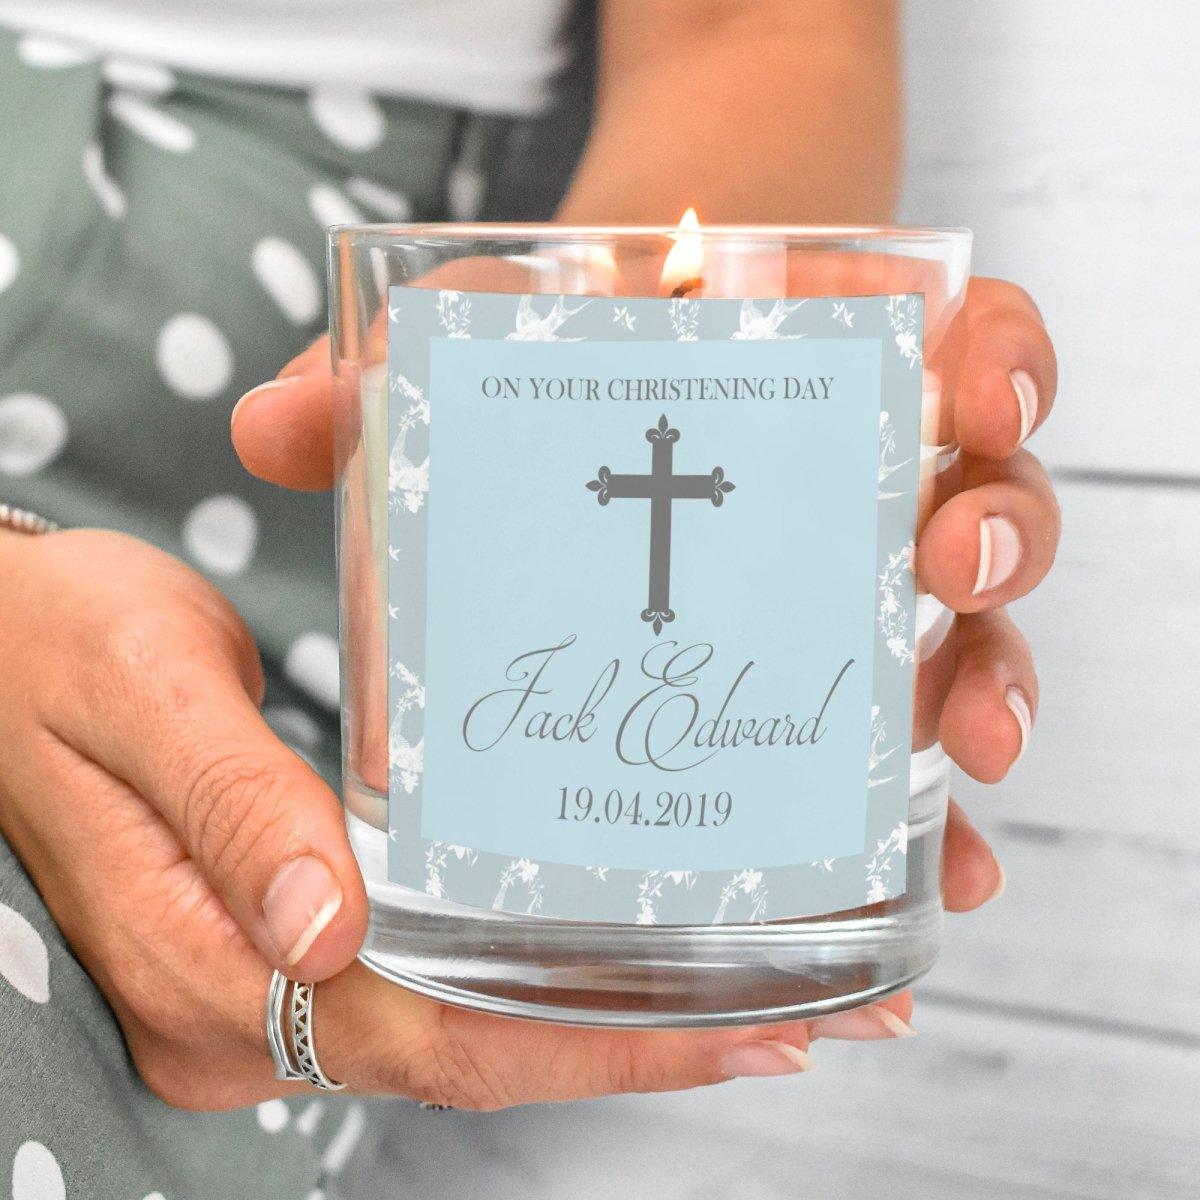 Personalised Christening Candle, Christening Memento Candle, Christening Memory Gift, Baby Christening Candle Gift, Scented Candle Gifts,